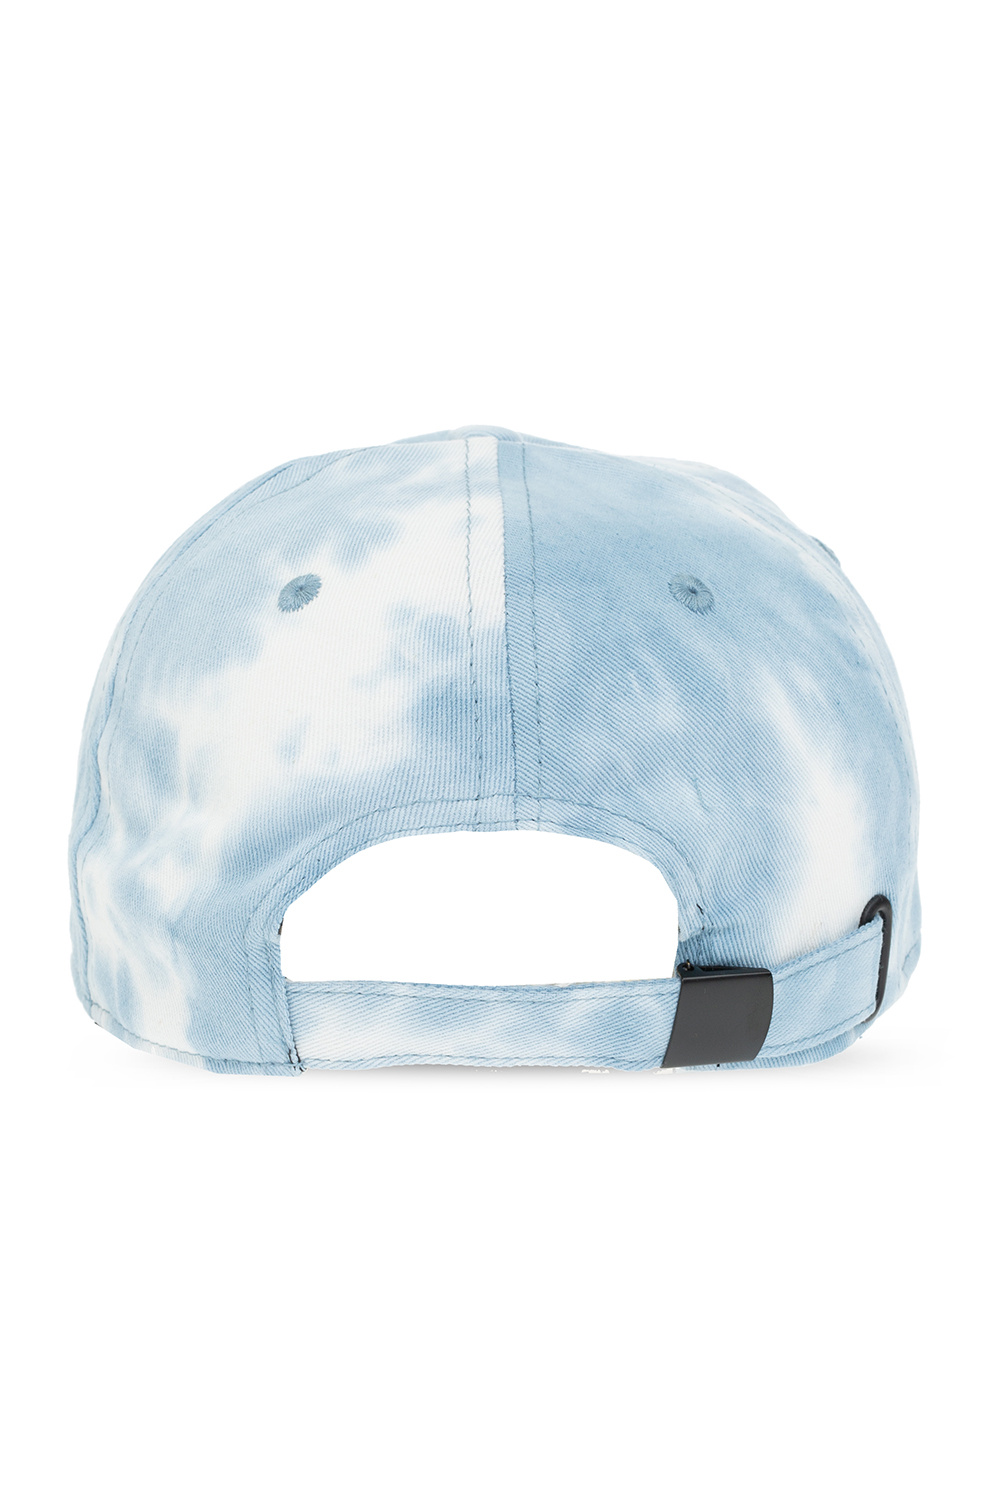 Converse Turquoise checked cap Blue Single discount 65% WOMEN FASHION Accessories Hat and cap Blue 